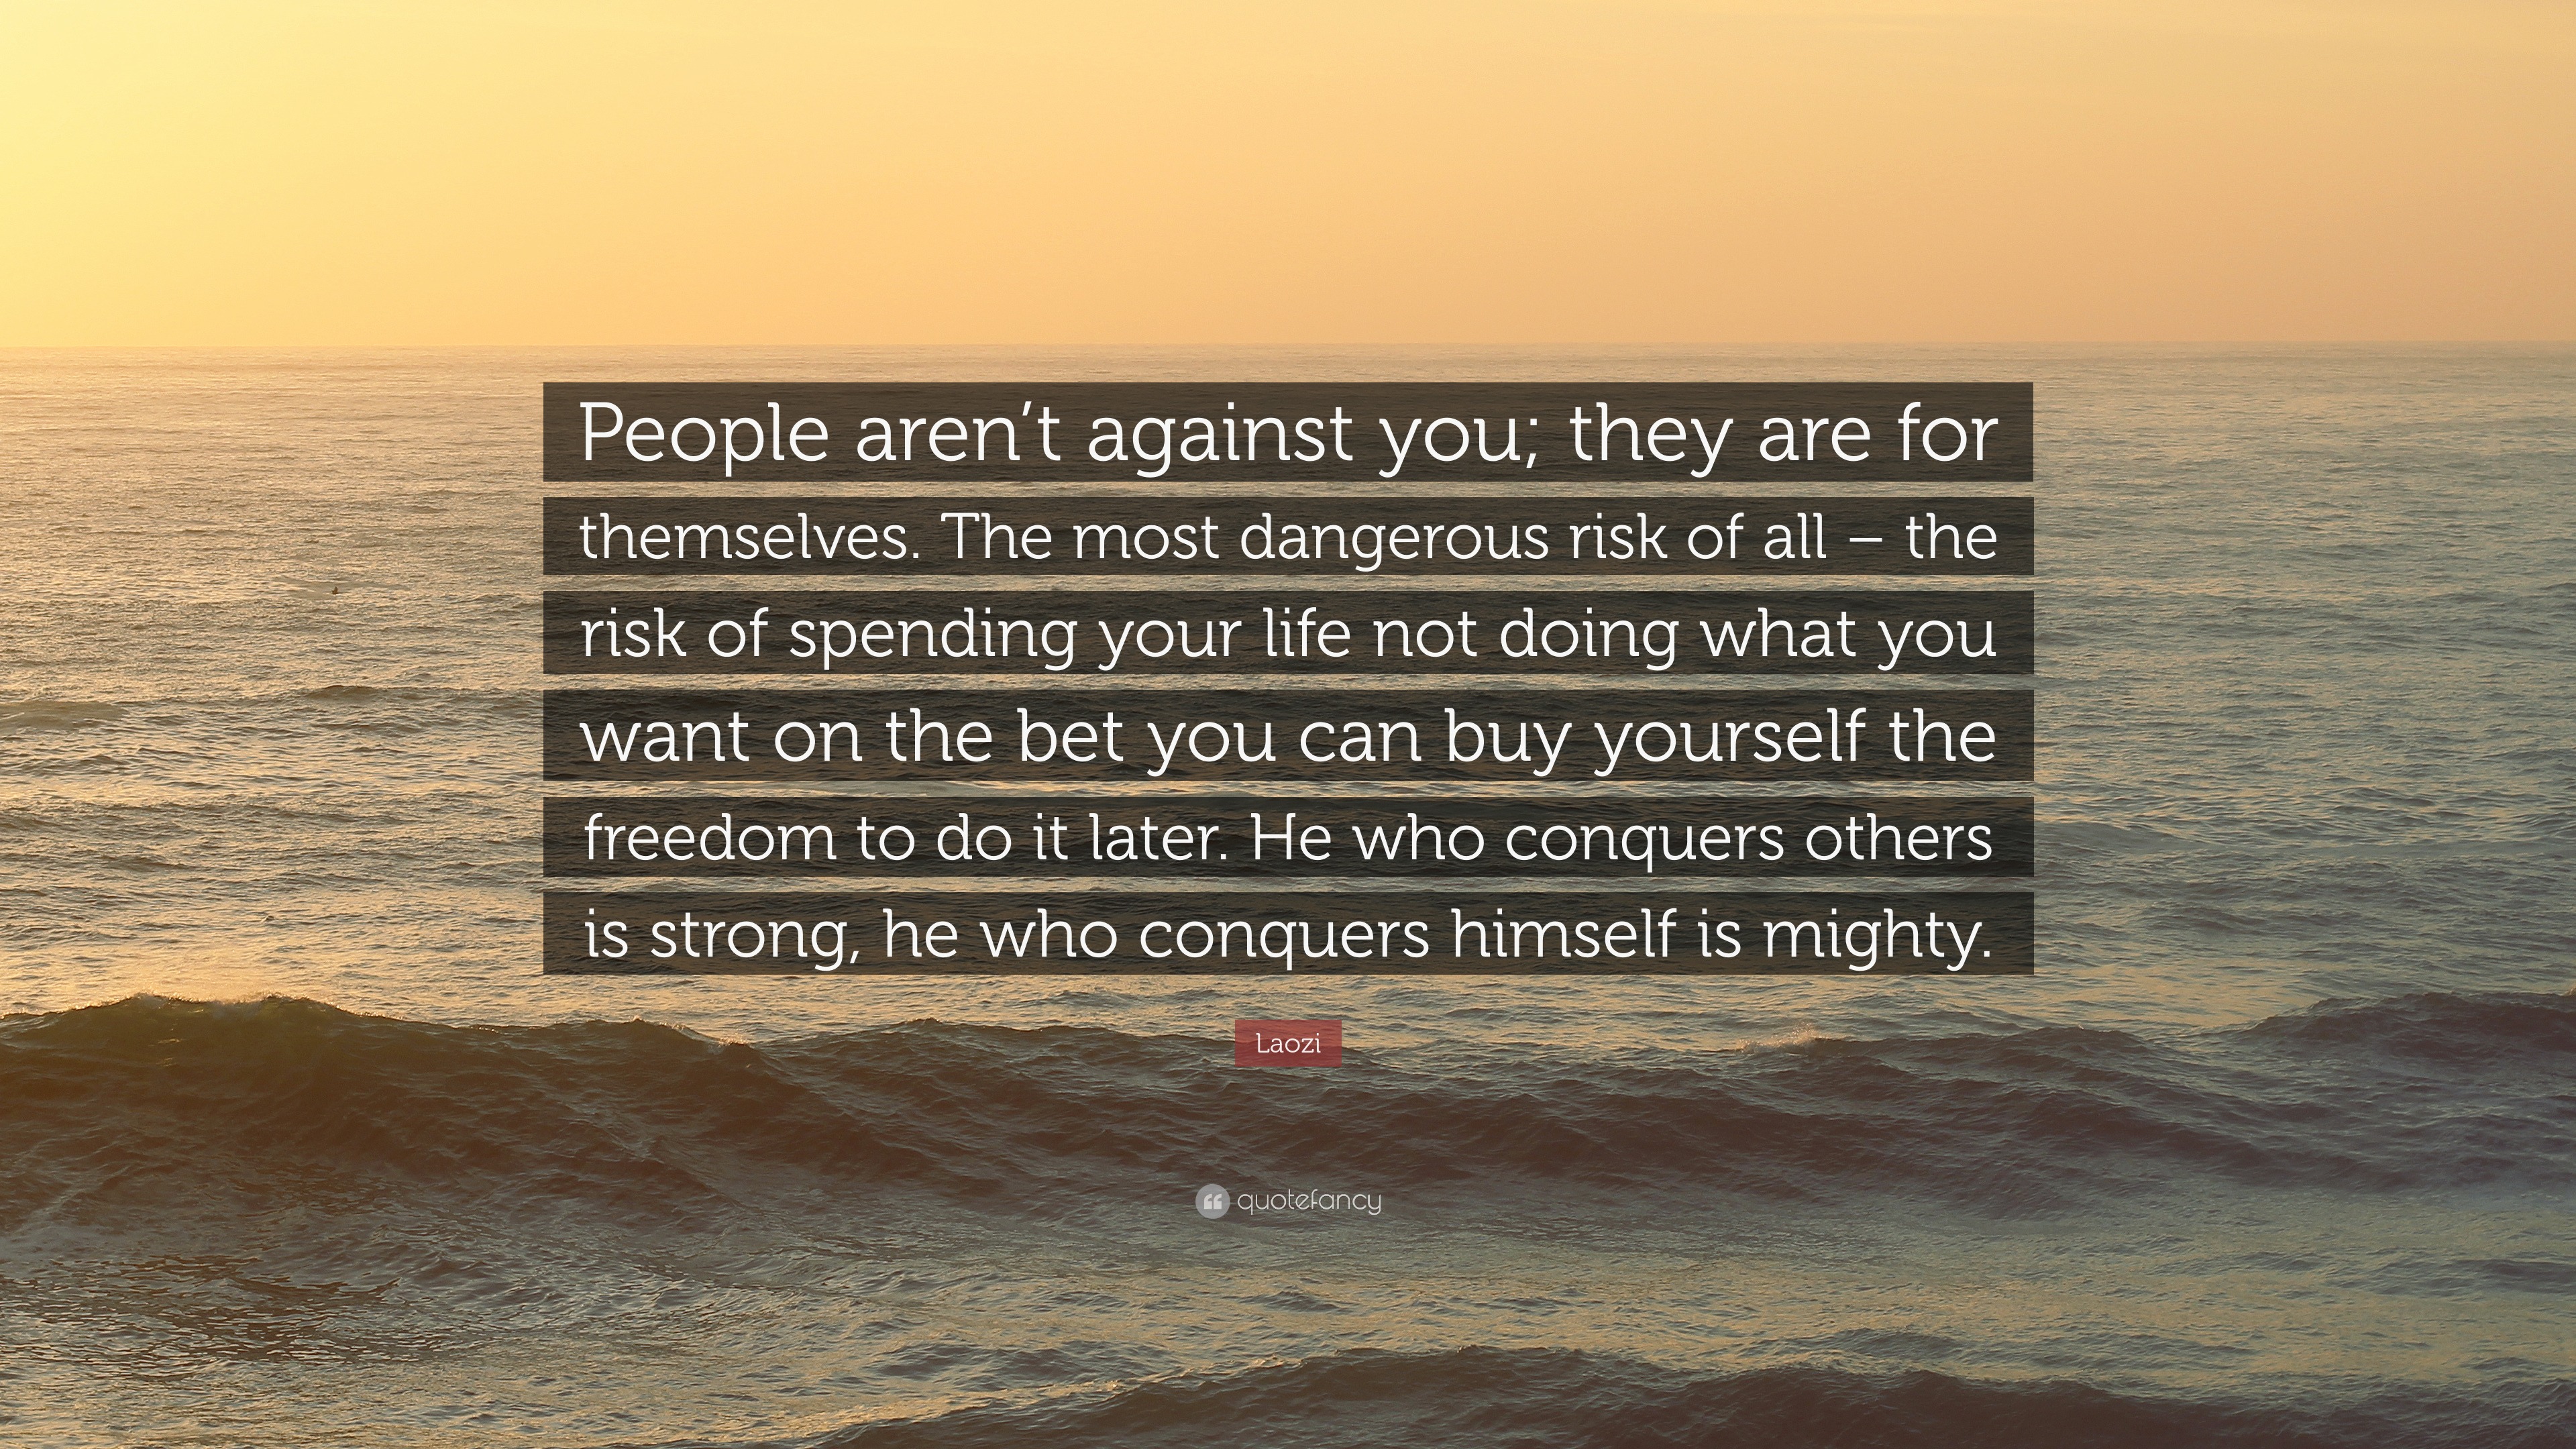 Laozi Quote: “People aren’t against you; they are for themselves. The